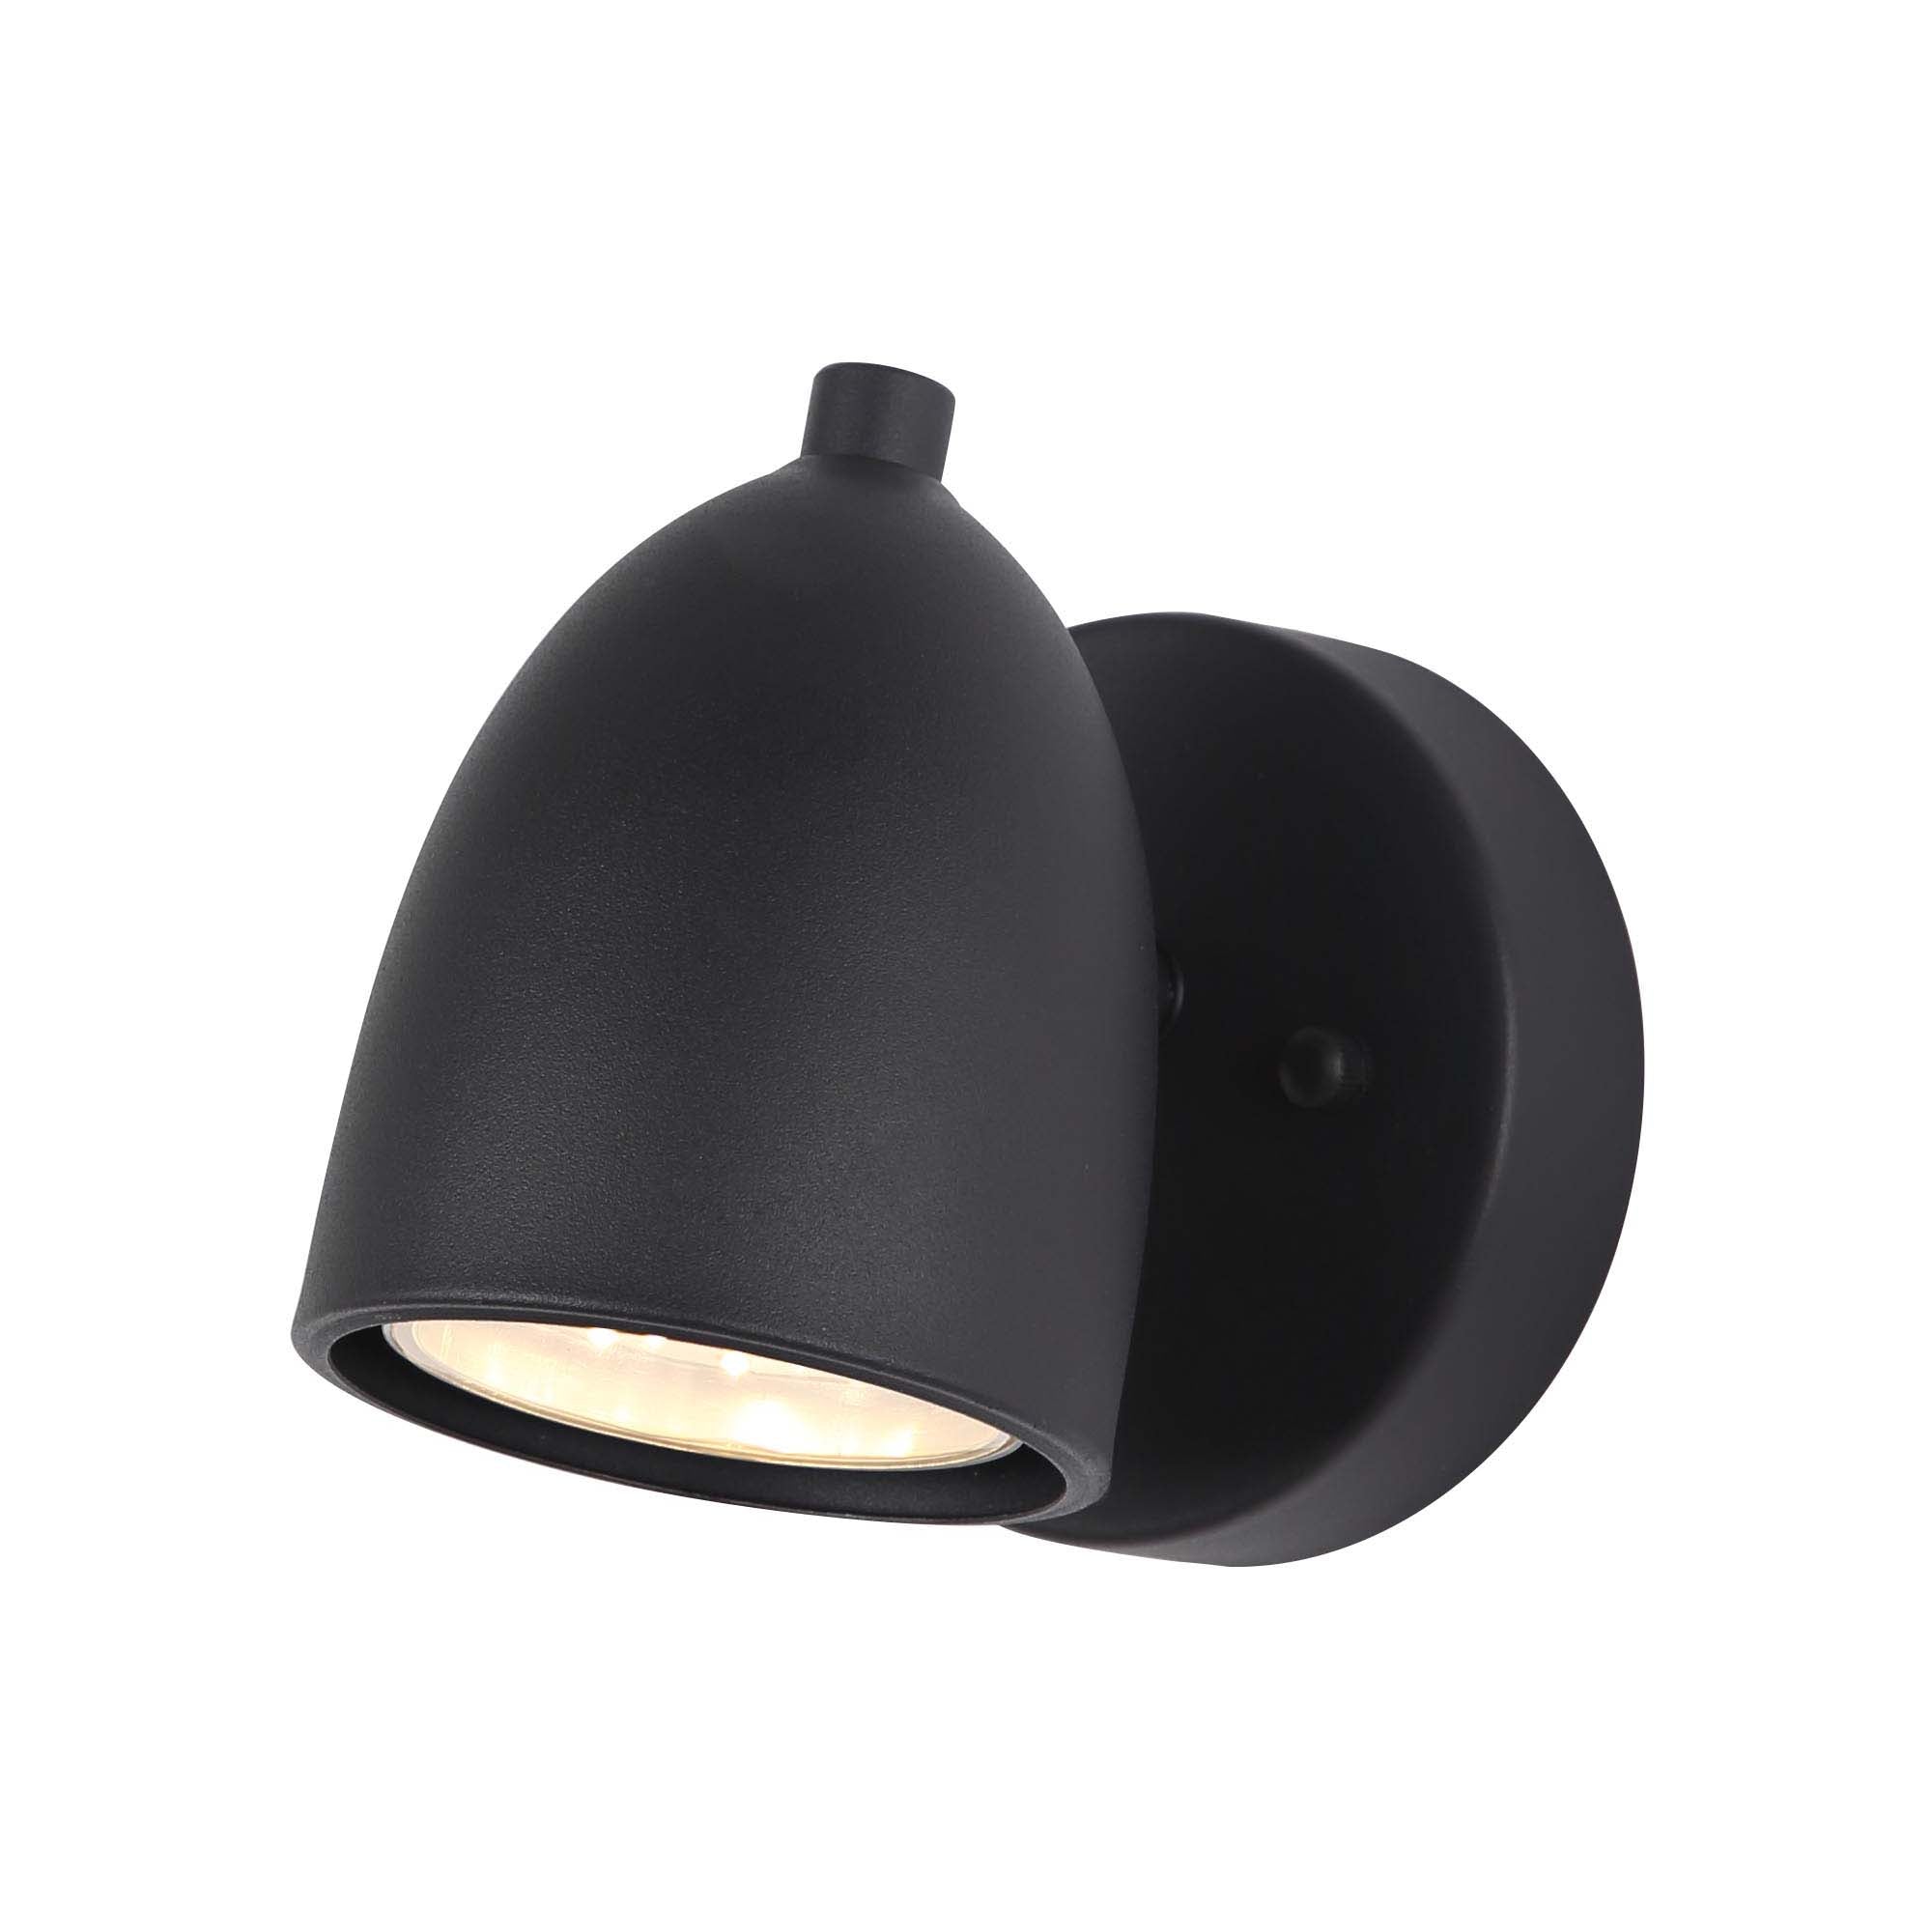 ENZO Outdoor wall sconce INTEGRATED LED - LOL578BK | CANARM